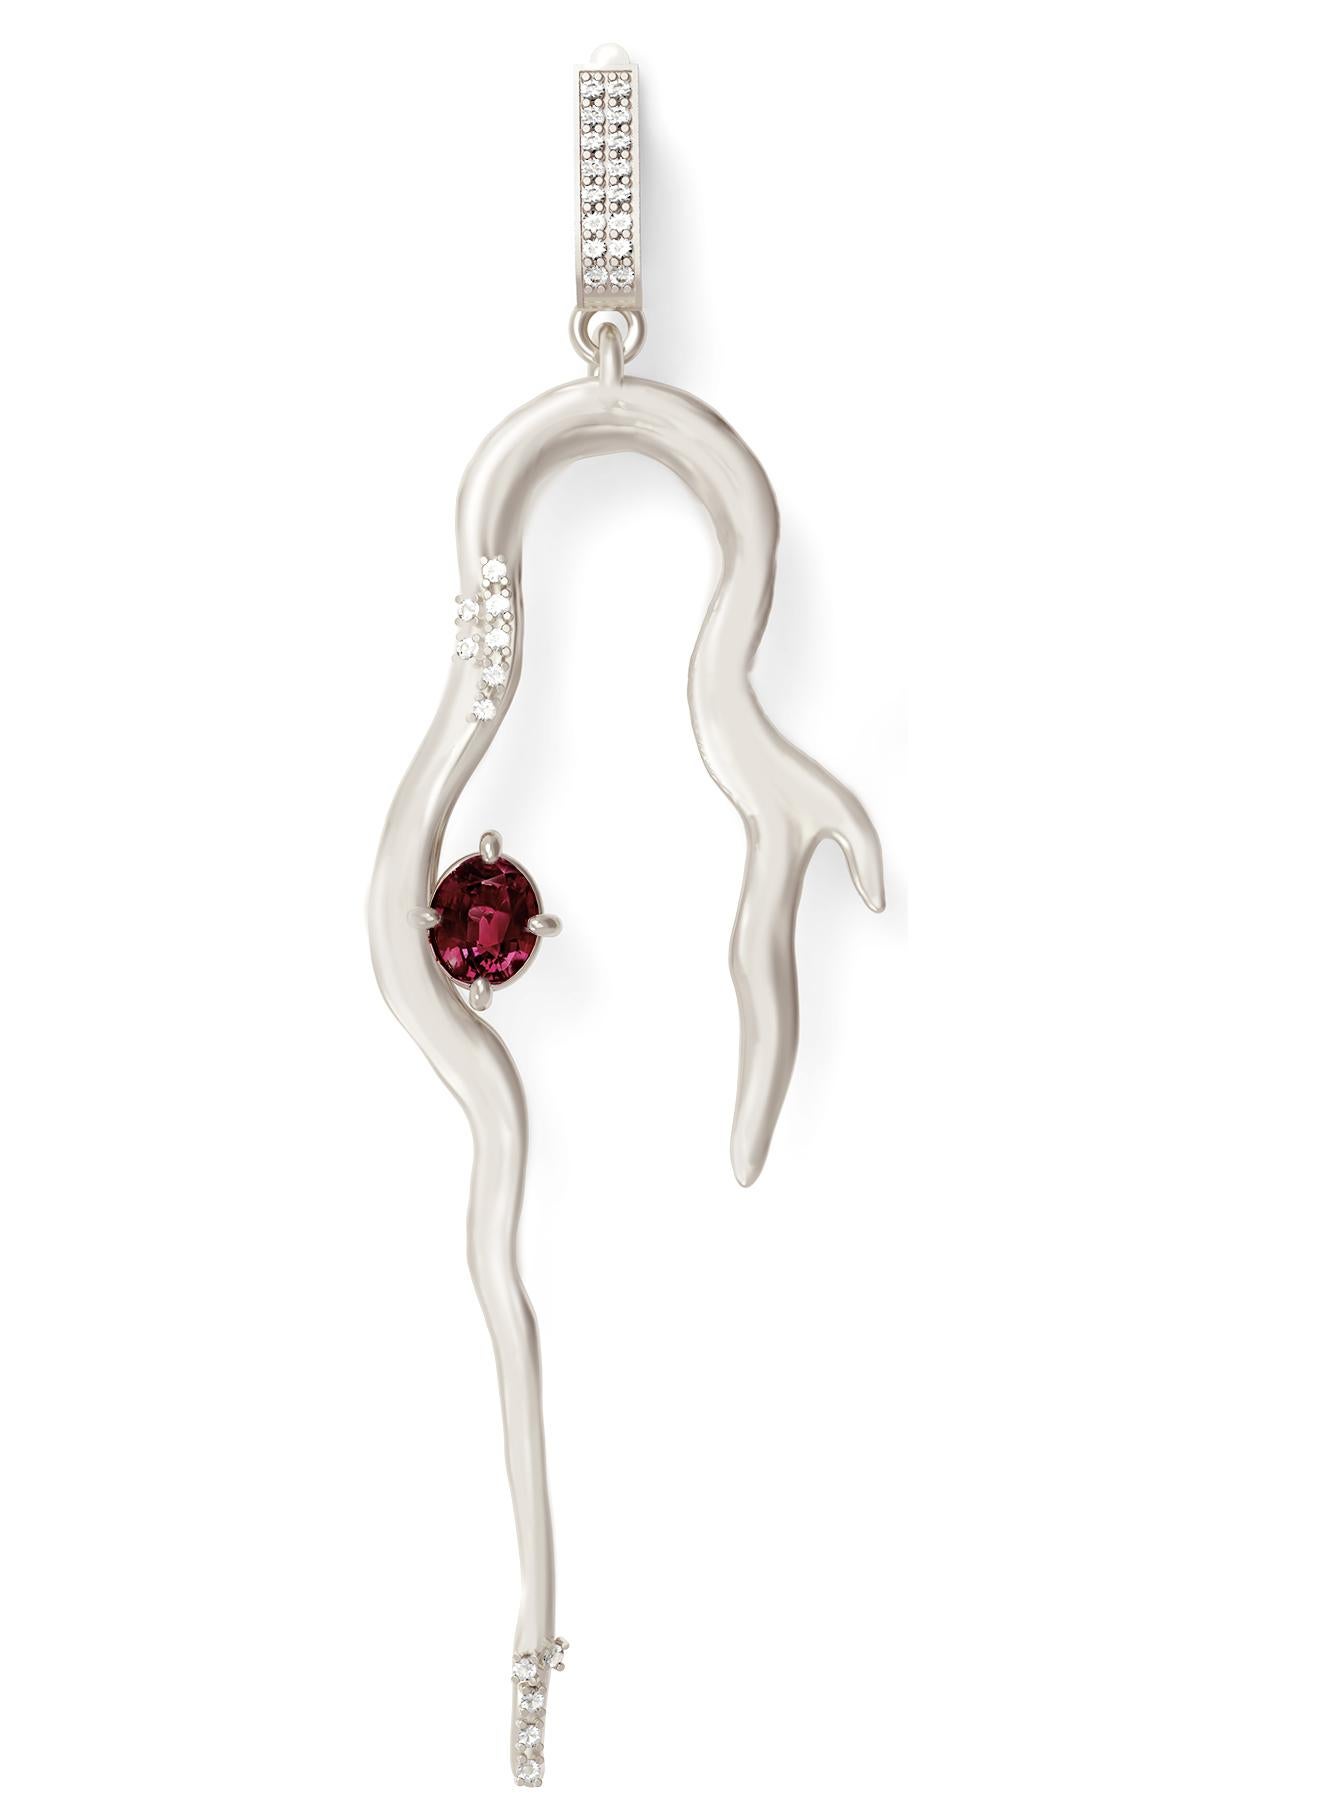 These contemporary 14 karat white gold cocktail earrings are encrusted with 56 natural round diamonds and wine red oval sapphire and matching Malaya garnet. Pine jewellery collection was featured in Vogue UA, Another UK, Interview, and other